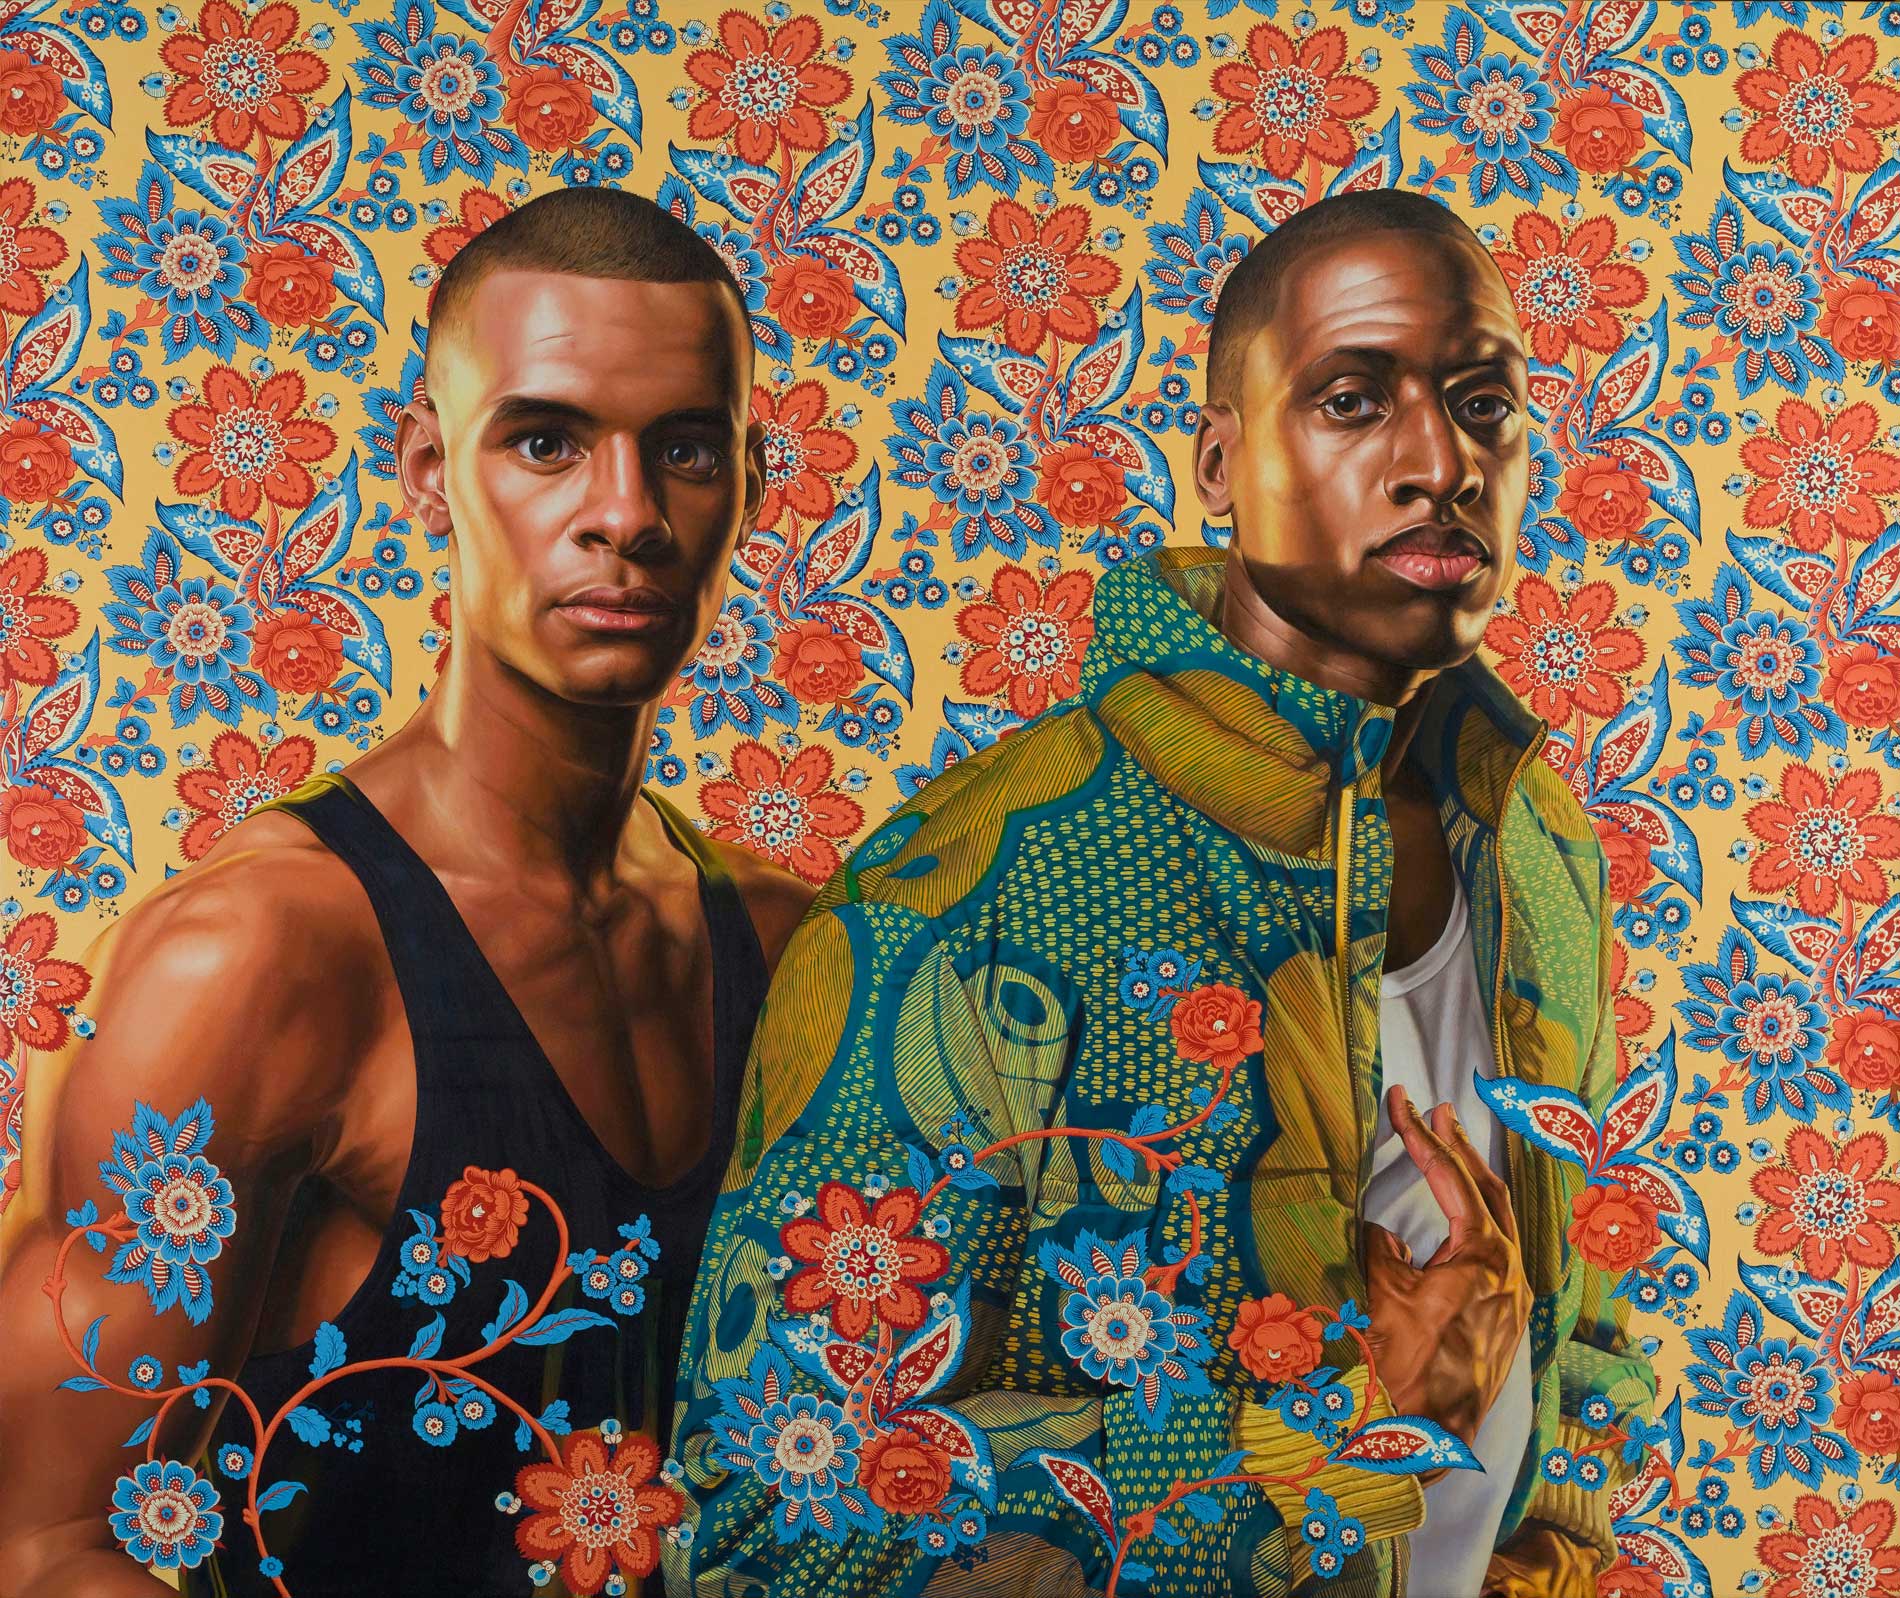 Kehinde Wiley | Selected Works: 2012 | Prince Charles Louis, Elector Palatine, and His Brother, Prince Rupert of the Palatinate, 2012, Oil on Canvas. | 9